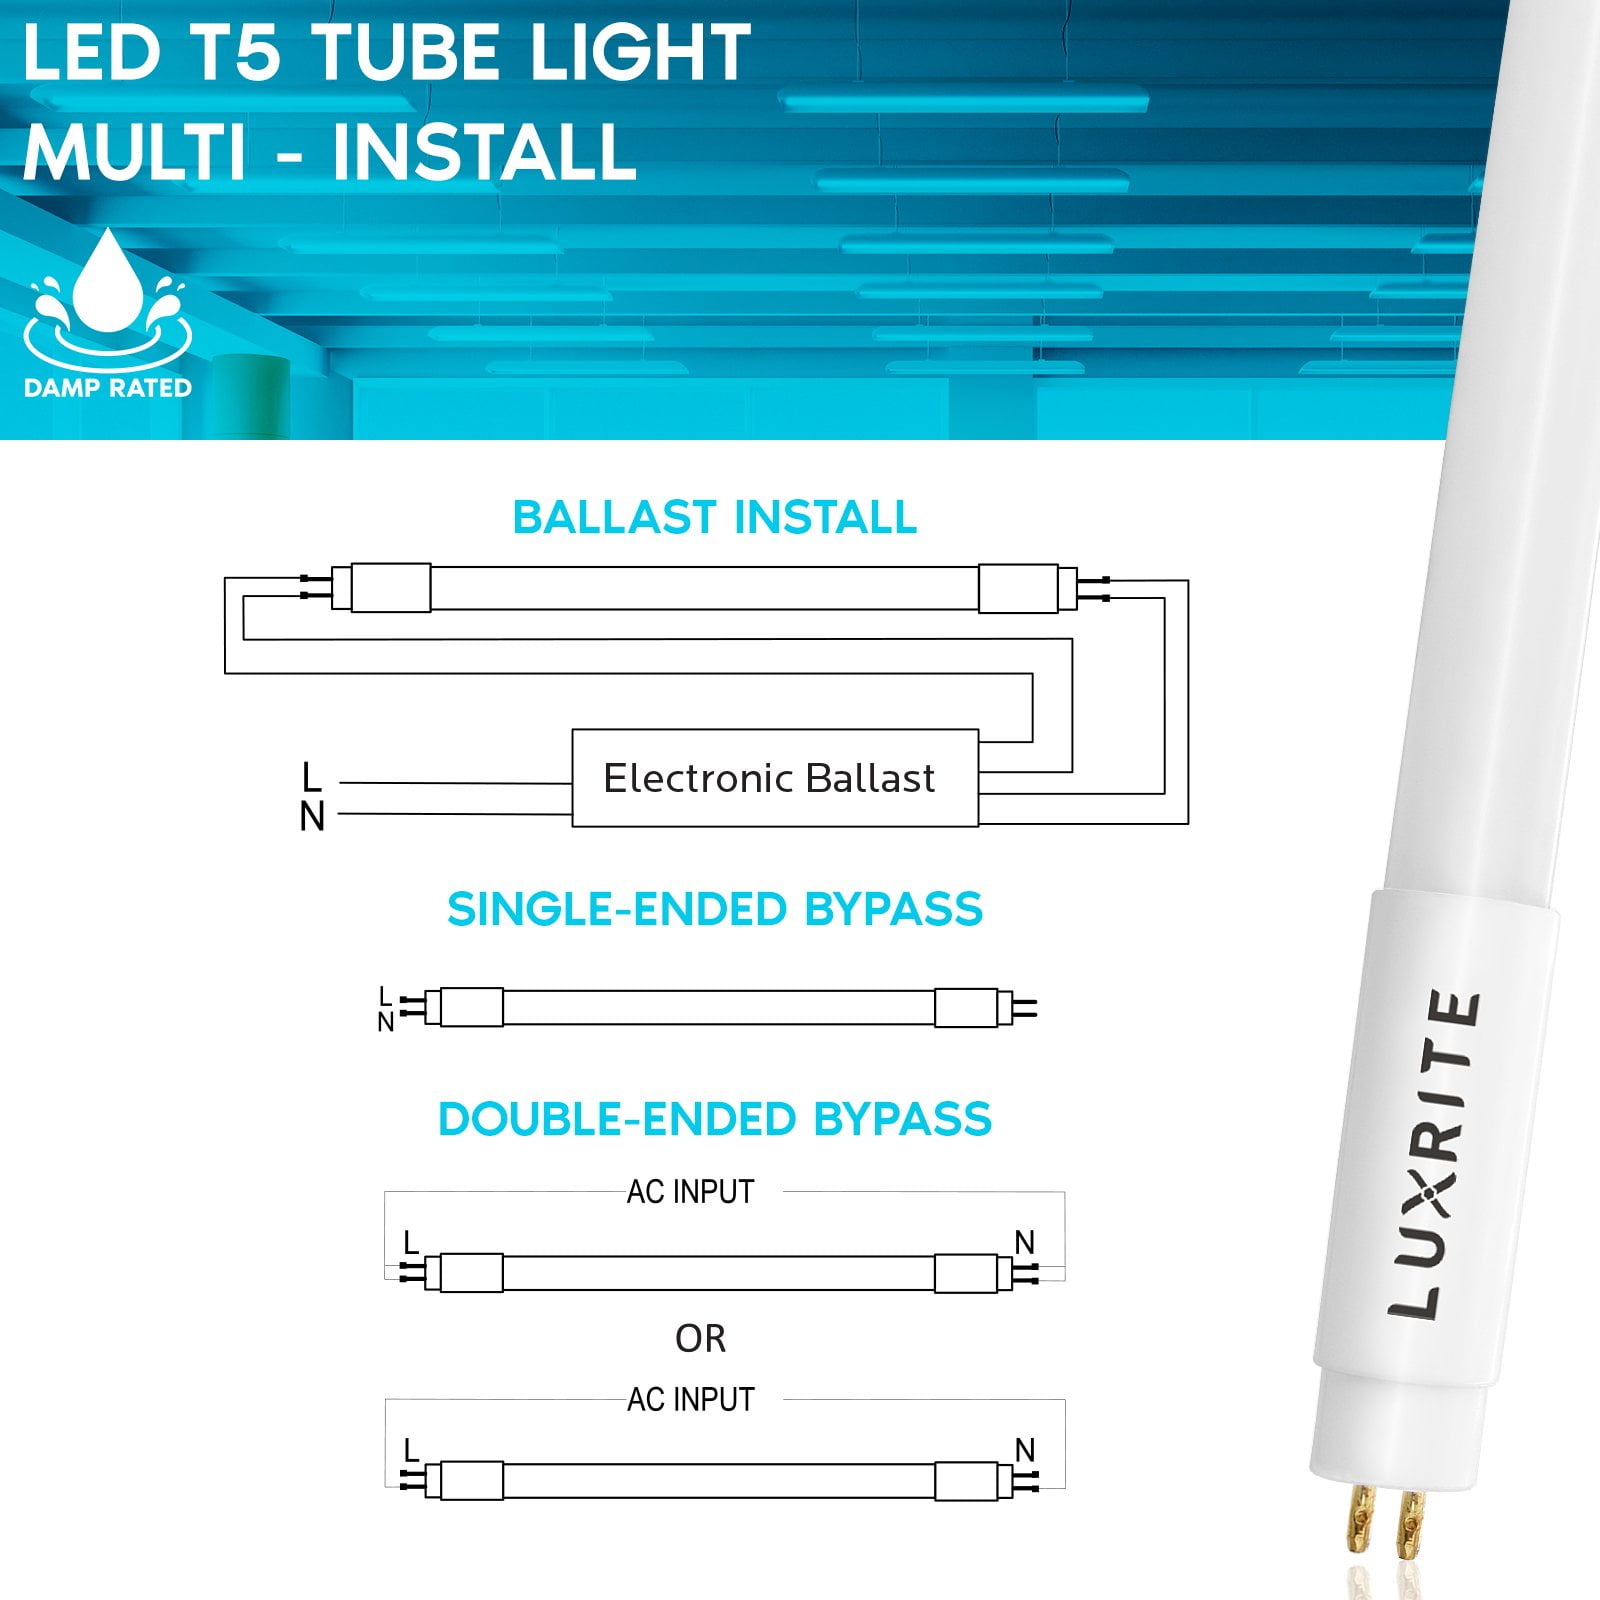 How to Install LED Tubes